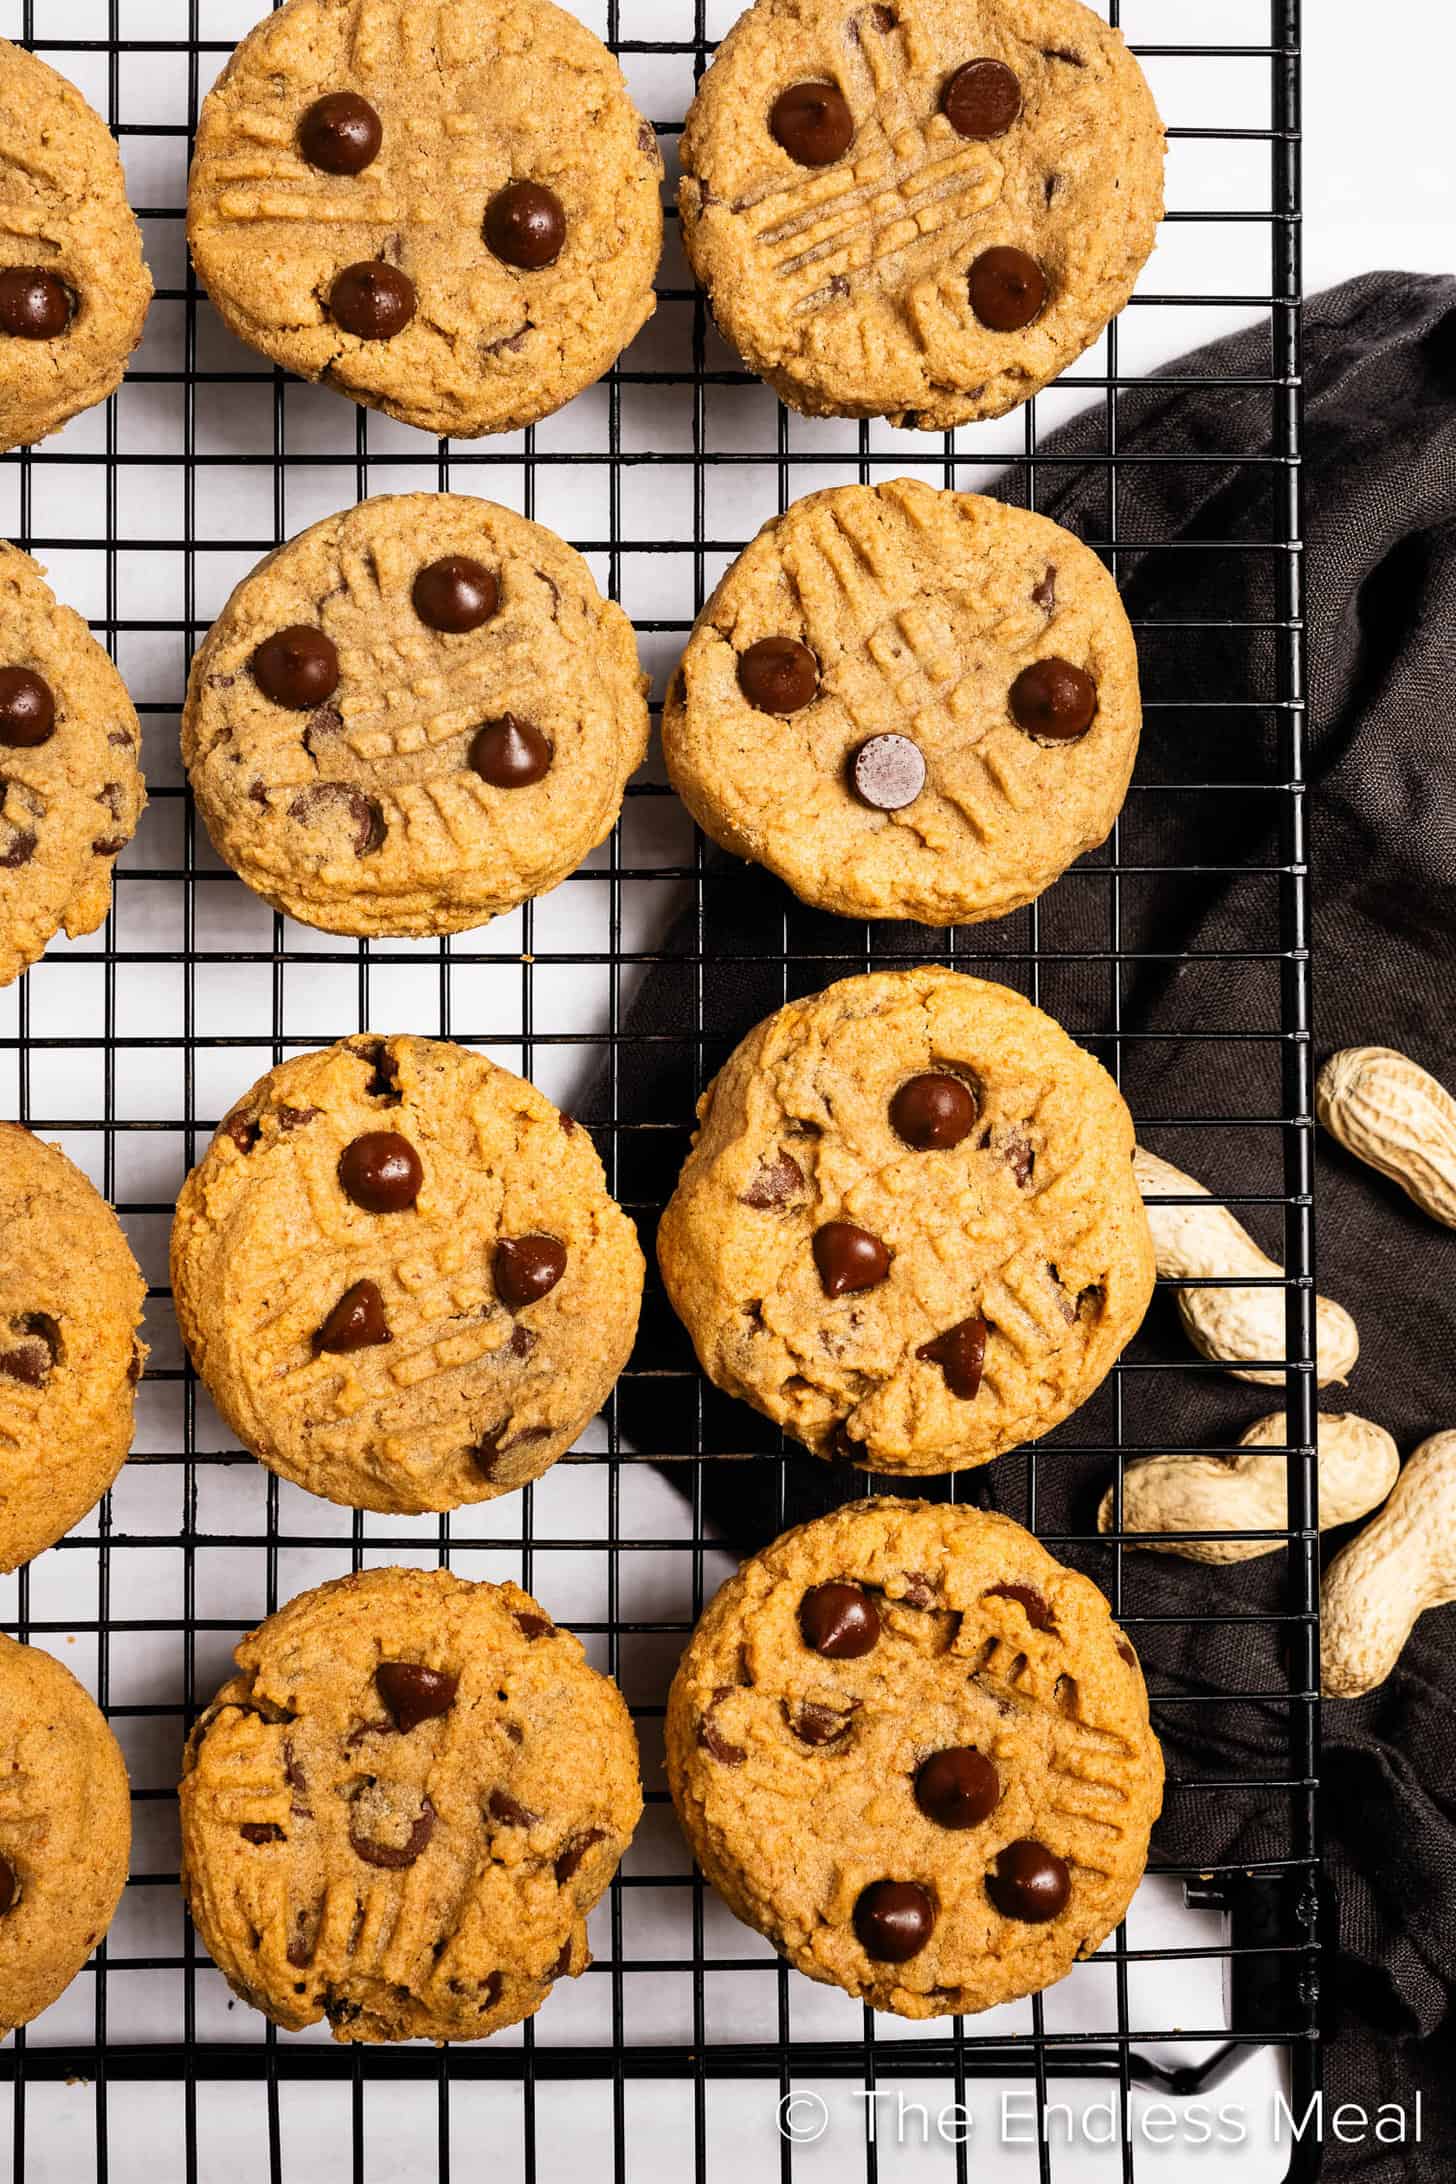 Whole Wheat Peanut Butter Cookies on a wire rack